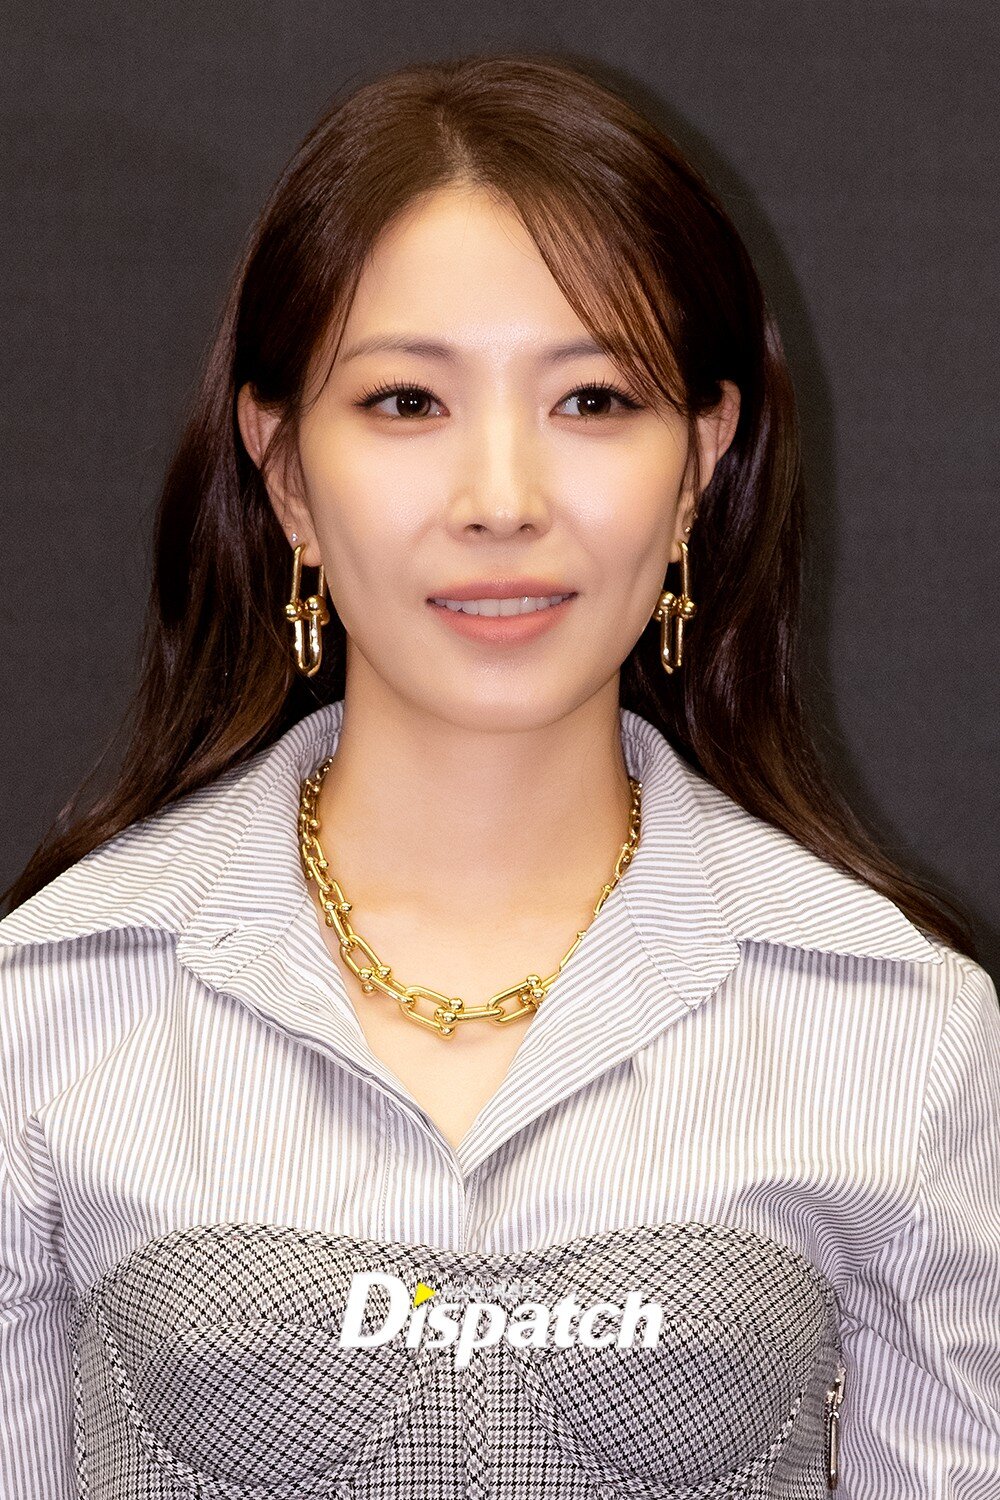 K Pop Star Boa: BoA faces flak from Street Man Fighter fans, gets accused  of biasness. See what happened - The Economic Times